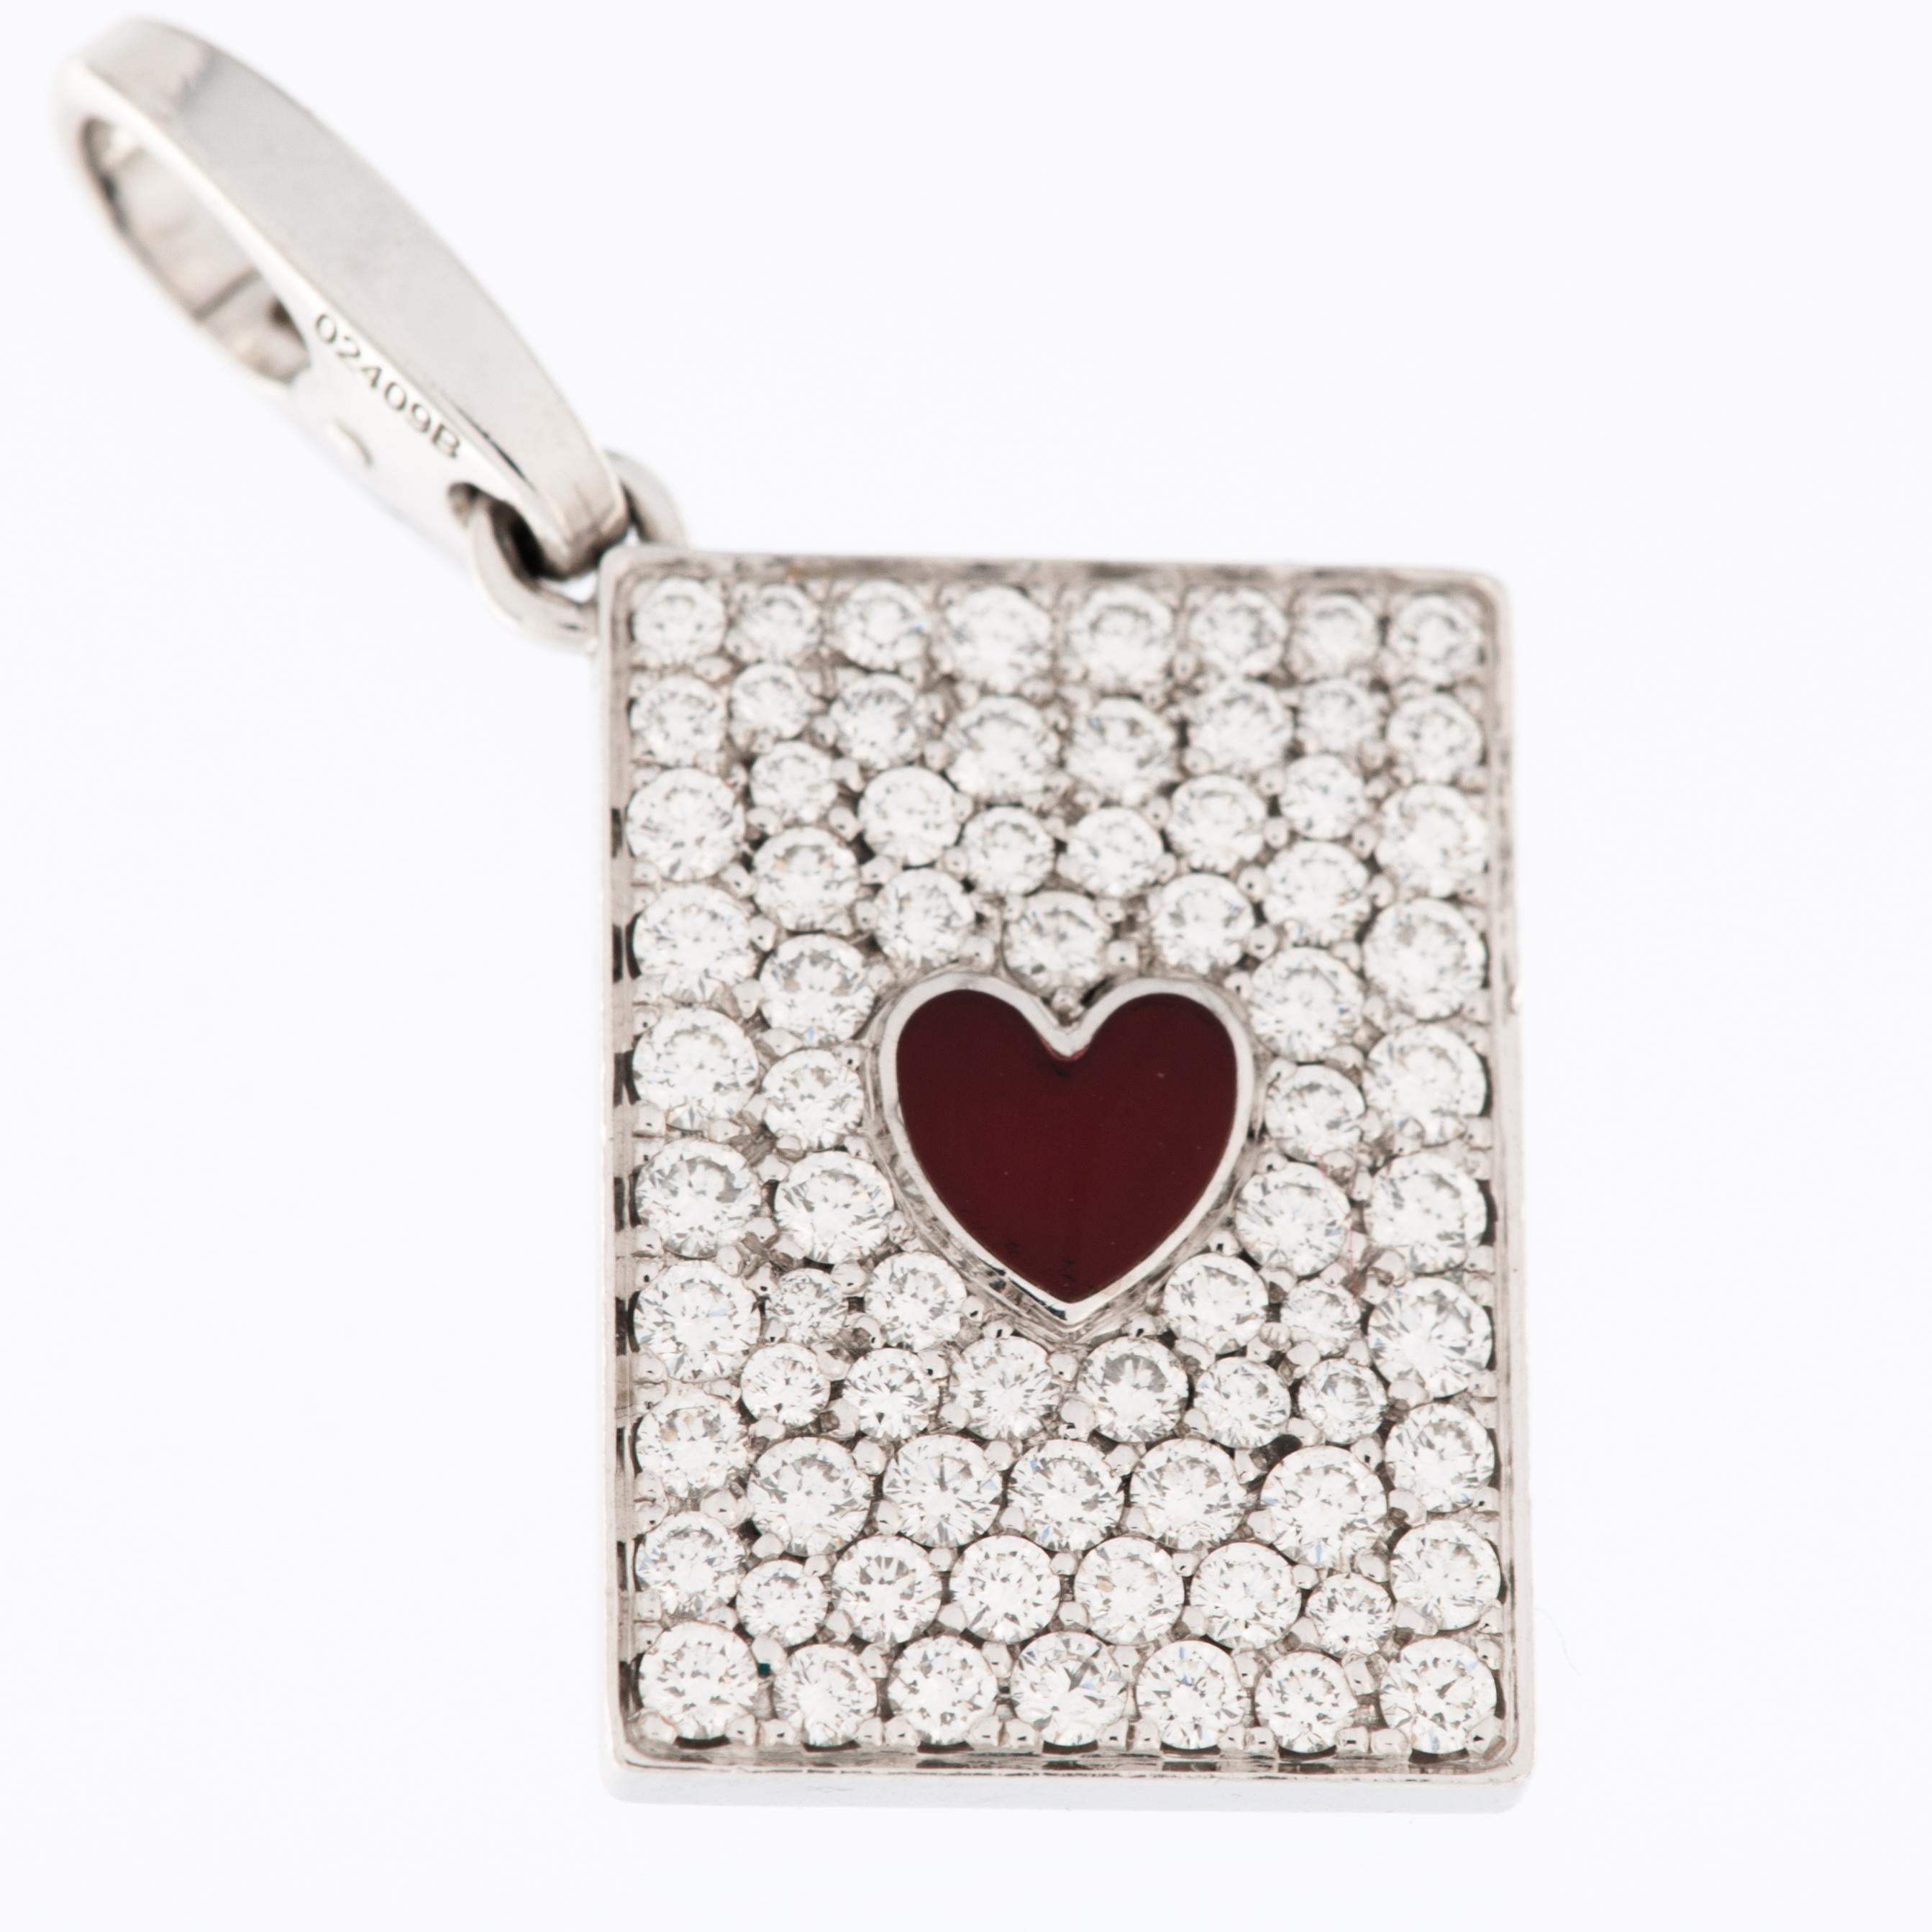 The Cartier Ace of Hearts Limited Edition Charm is a distinctive and exclusive piece that embodies the craftsmanship and elegance synonymous with the Cartier brand. 

The charm is shaped like the iconic Ace of Hearts playing card, featuring the